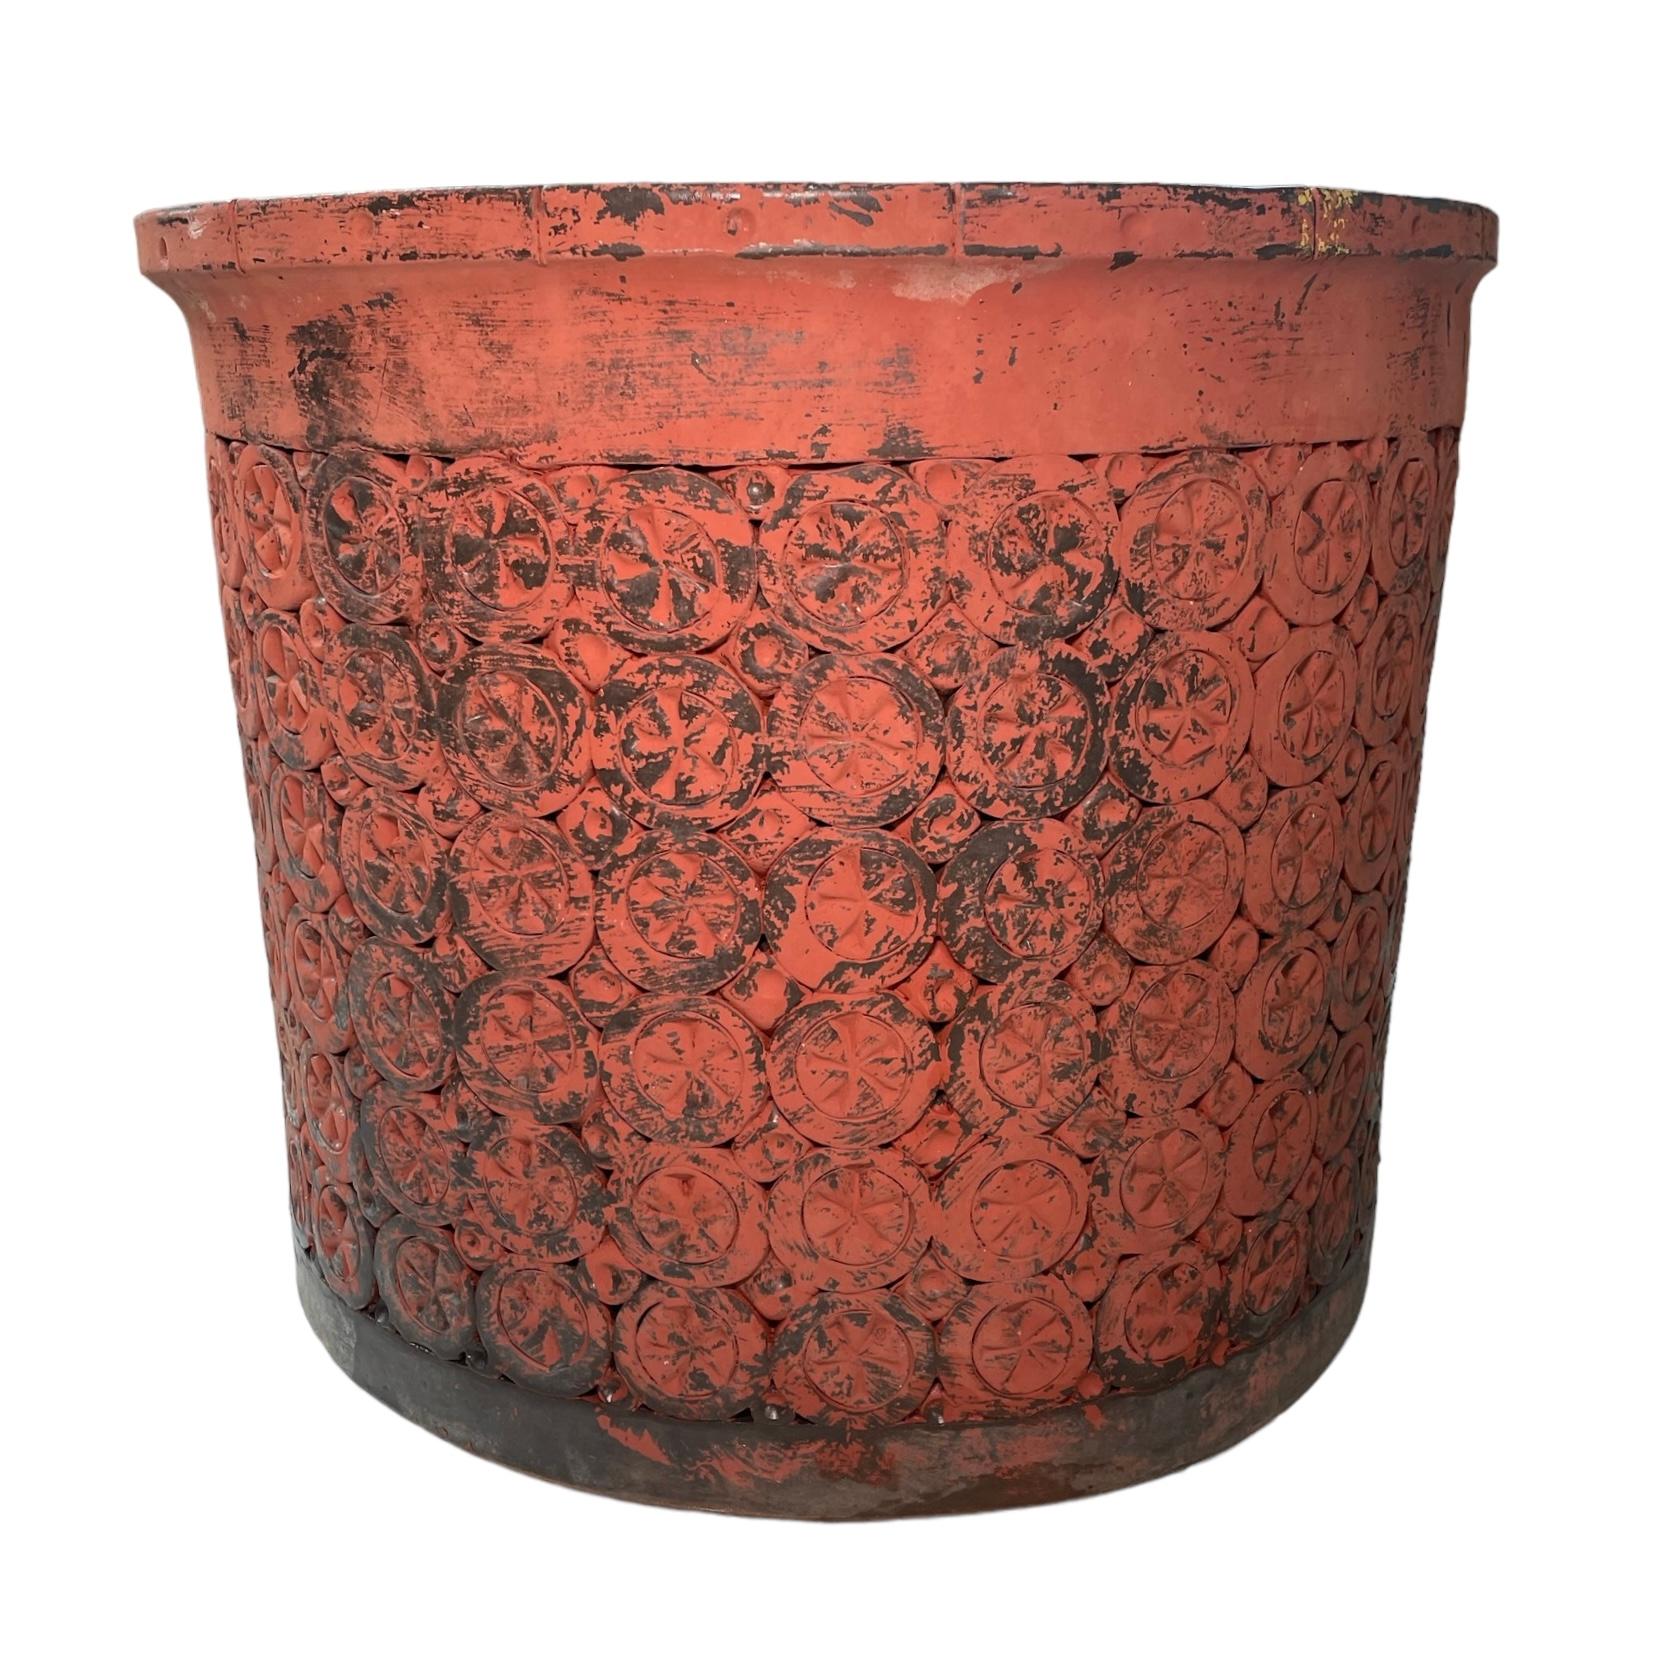 This is a Puerto Rican, Isla Del Sol Stoneware Planter. It depicts a heavy orange round planter decorated with six rows of circles adorned in the center with stars. These rows are alternated with six rows of squares with concave hemispheric centers.